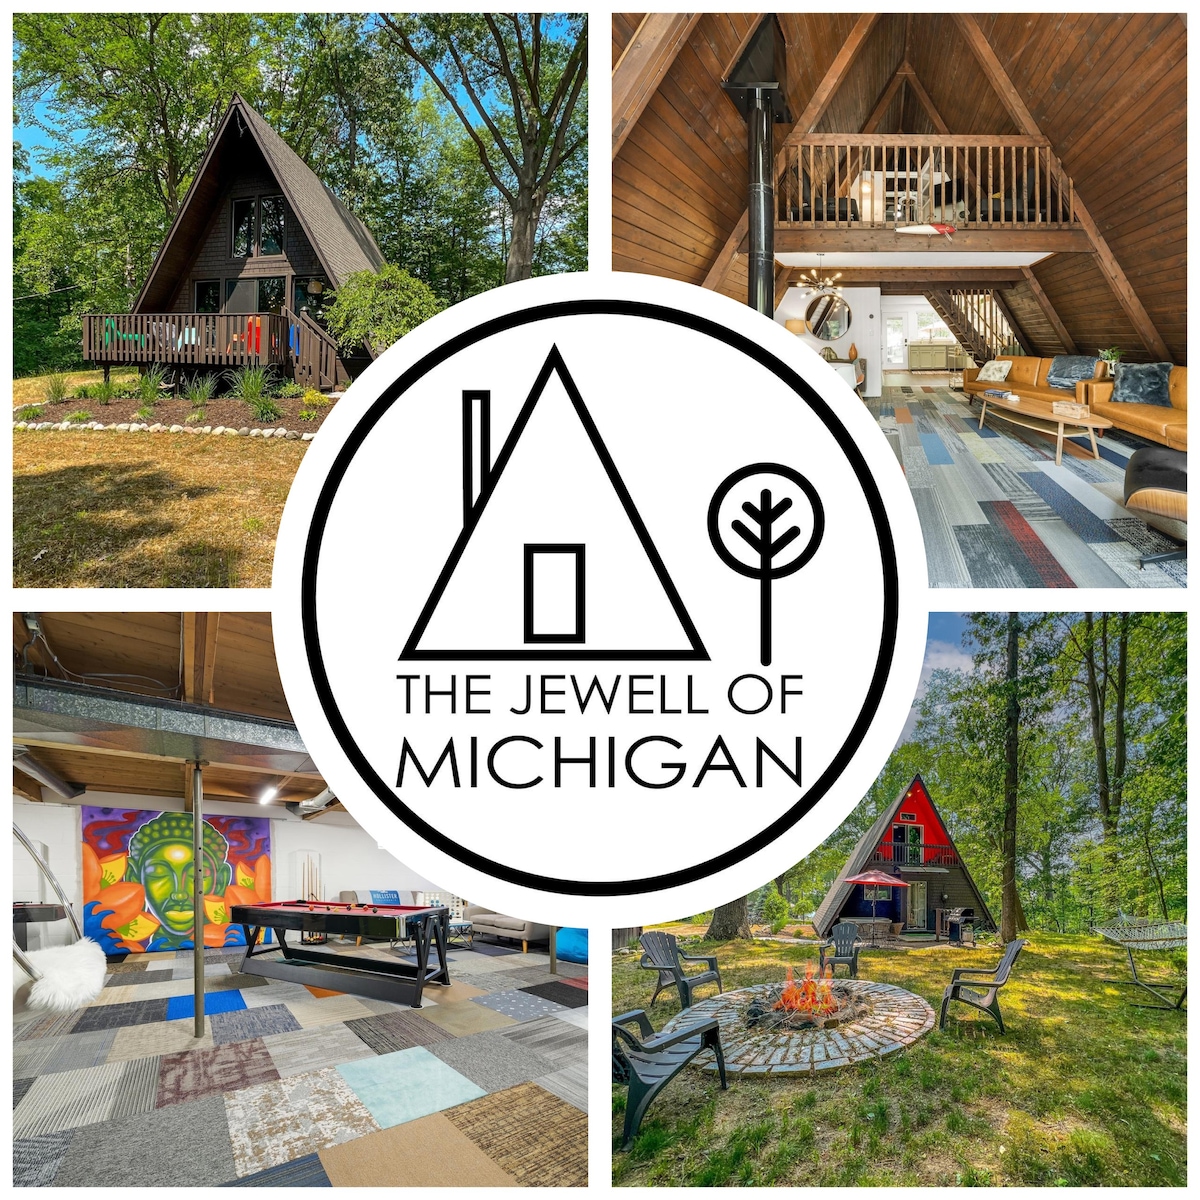 The Jewell of Michigan A-frame